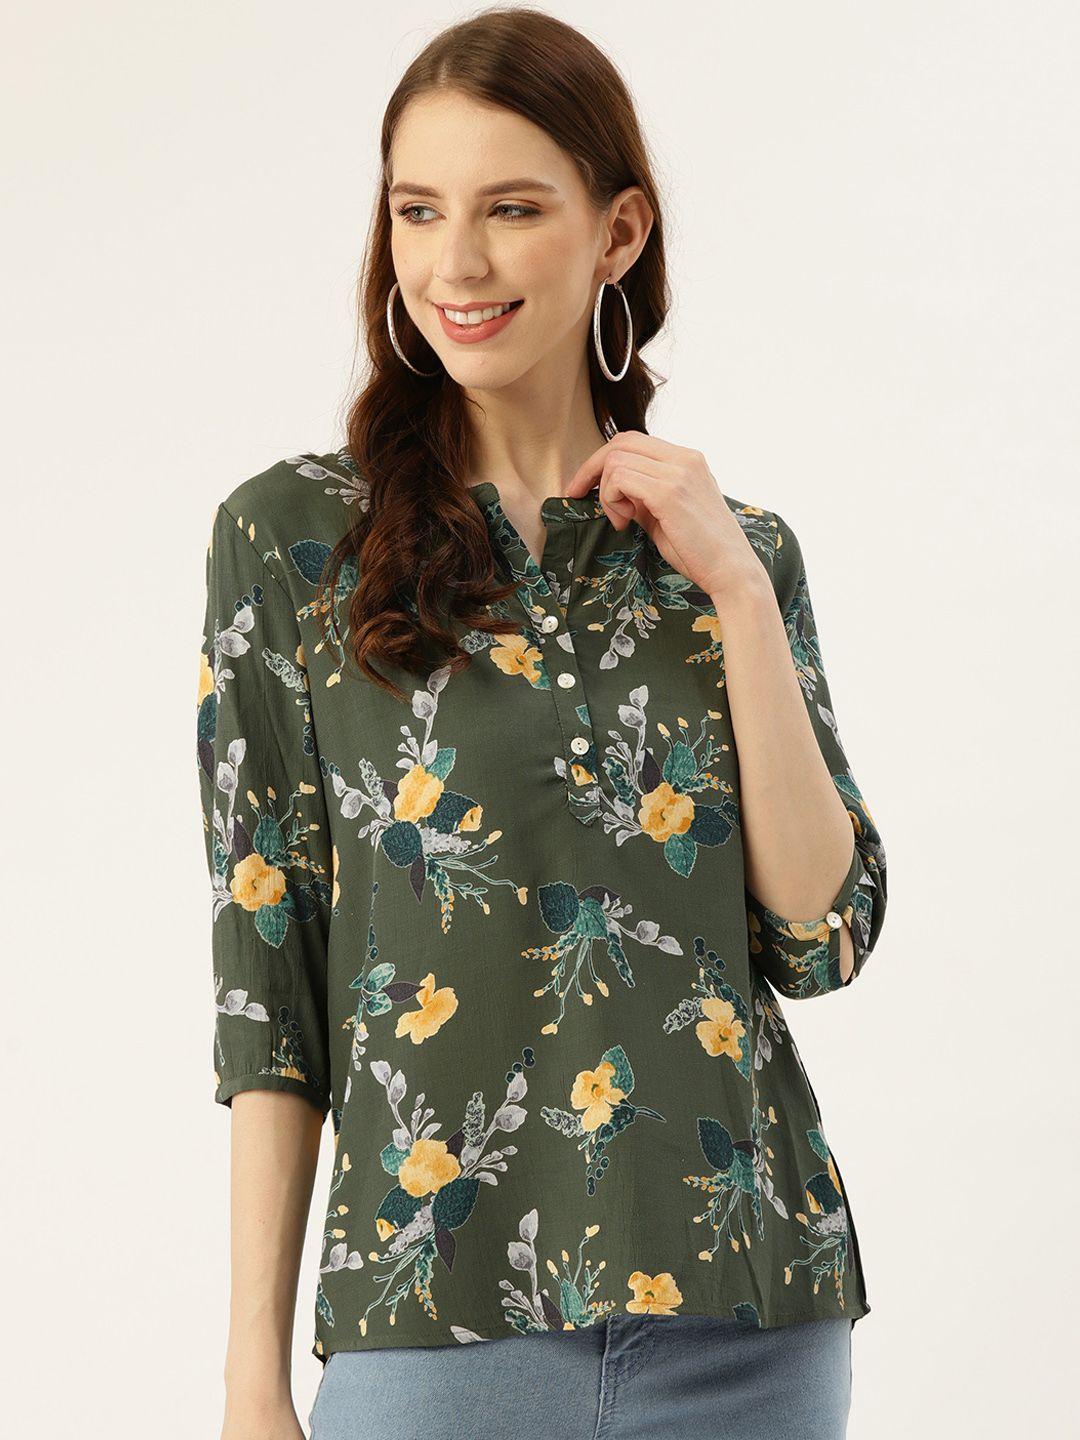 off label women olive green & yellow floral printed top